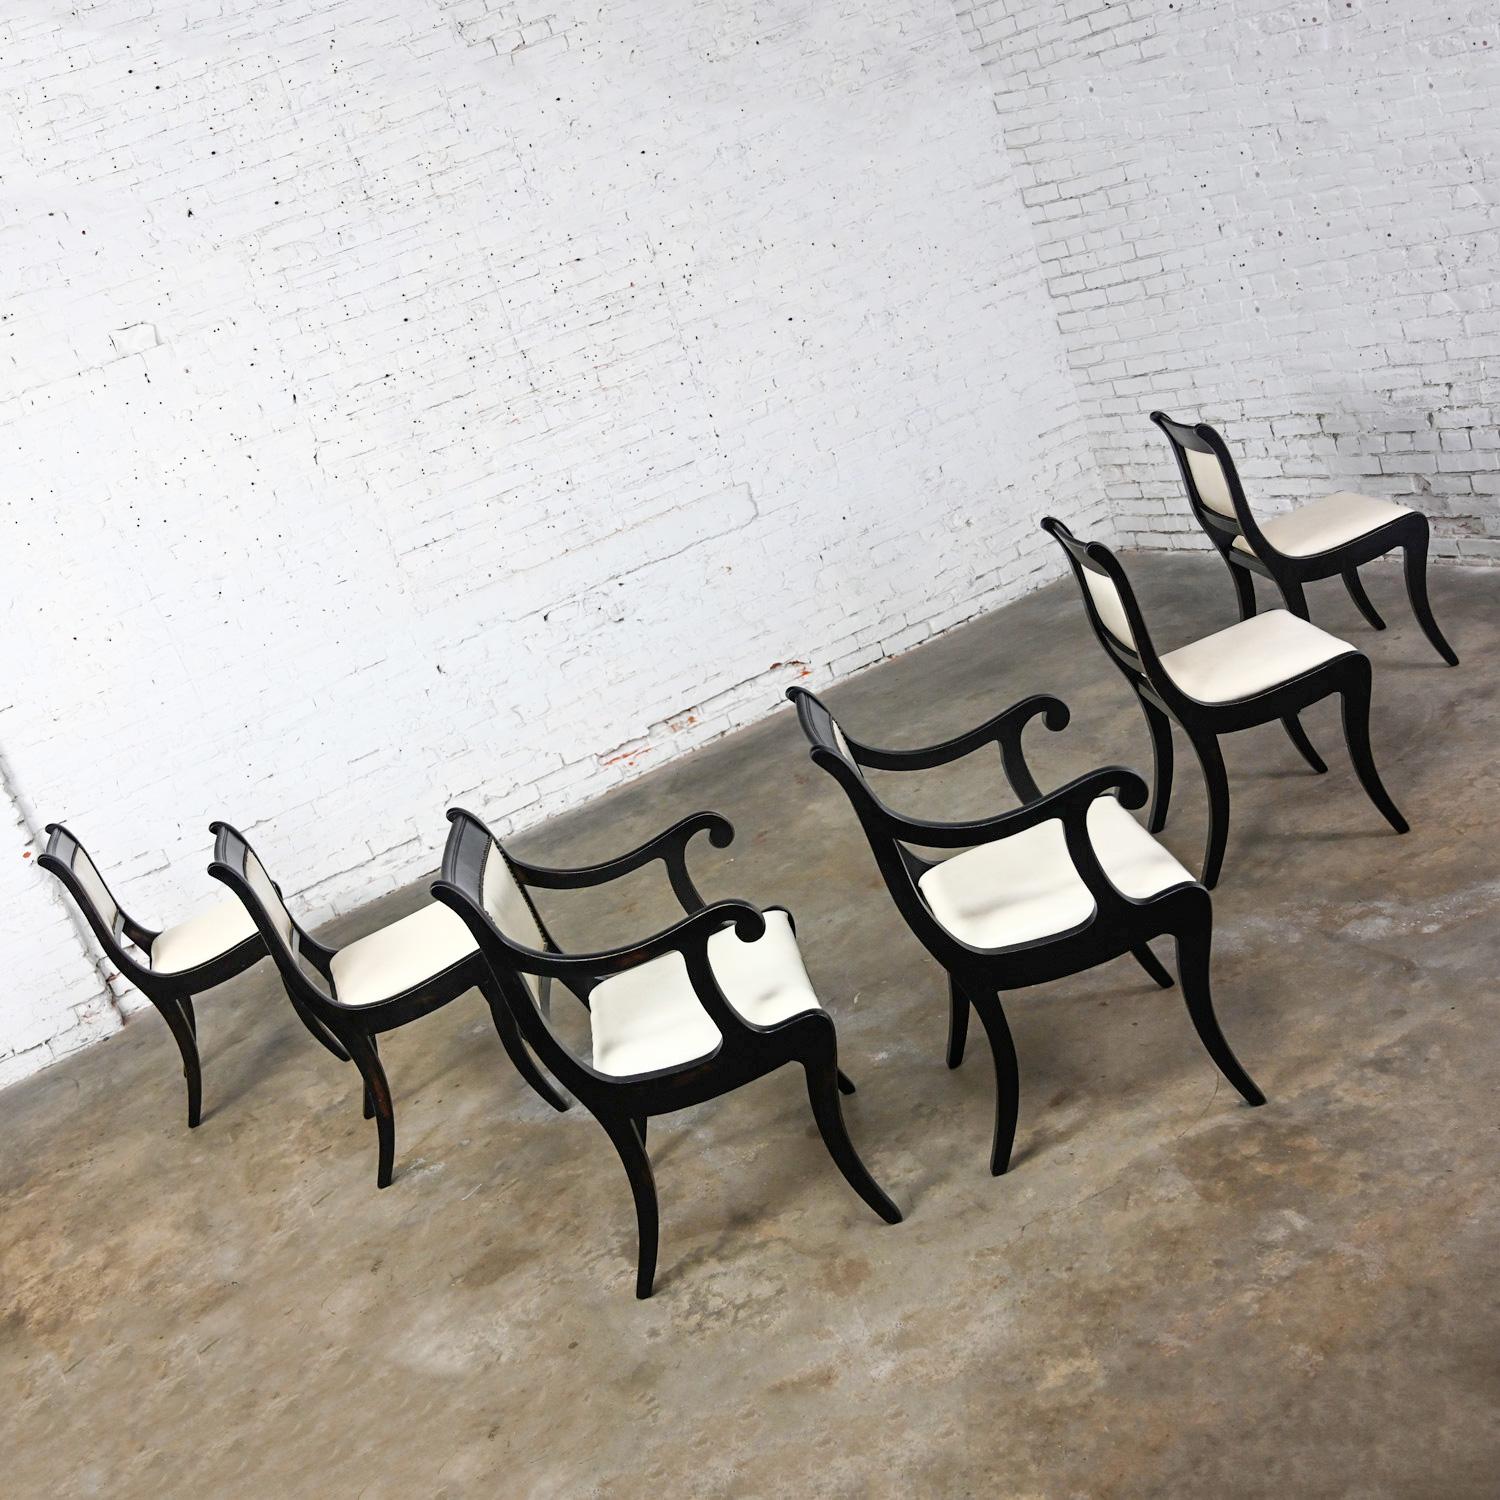 American Mid 20th Regency Style Dining Chairs Off White Faux Leather Black Frames Set 6